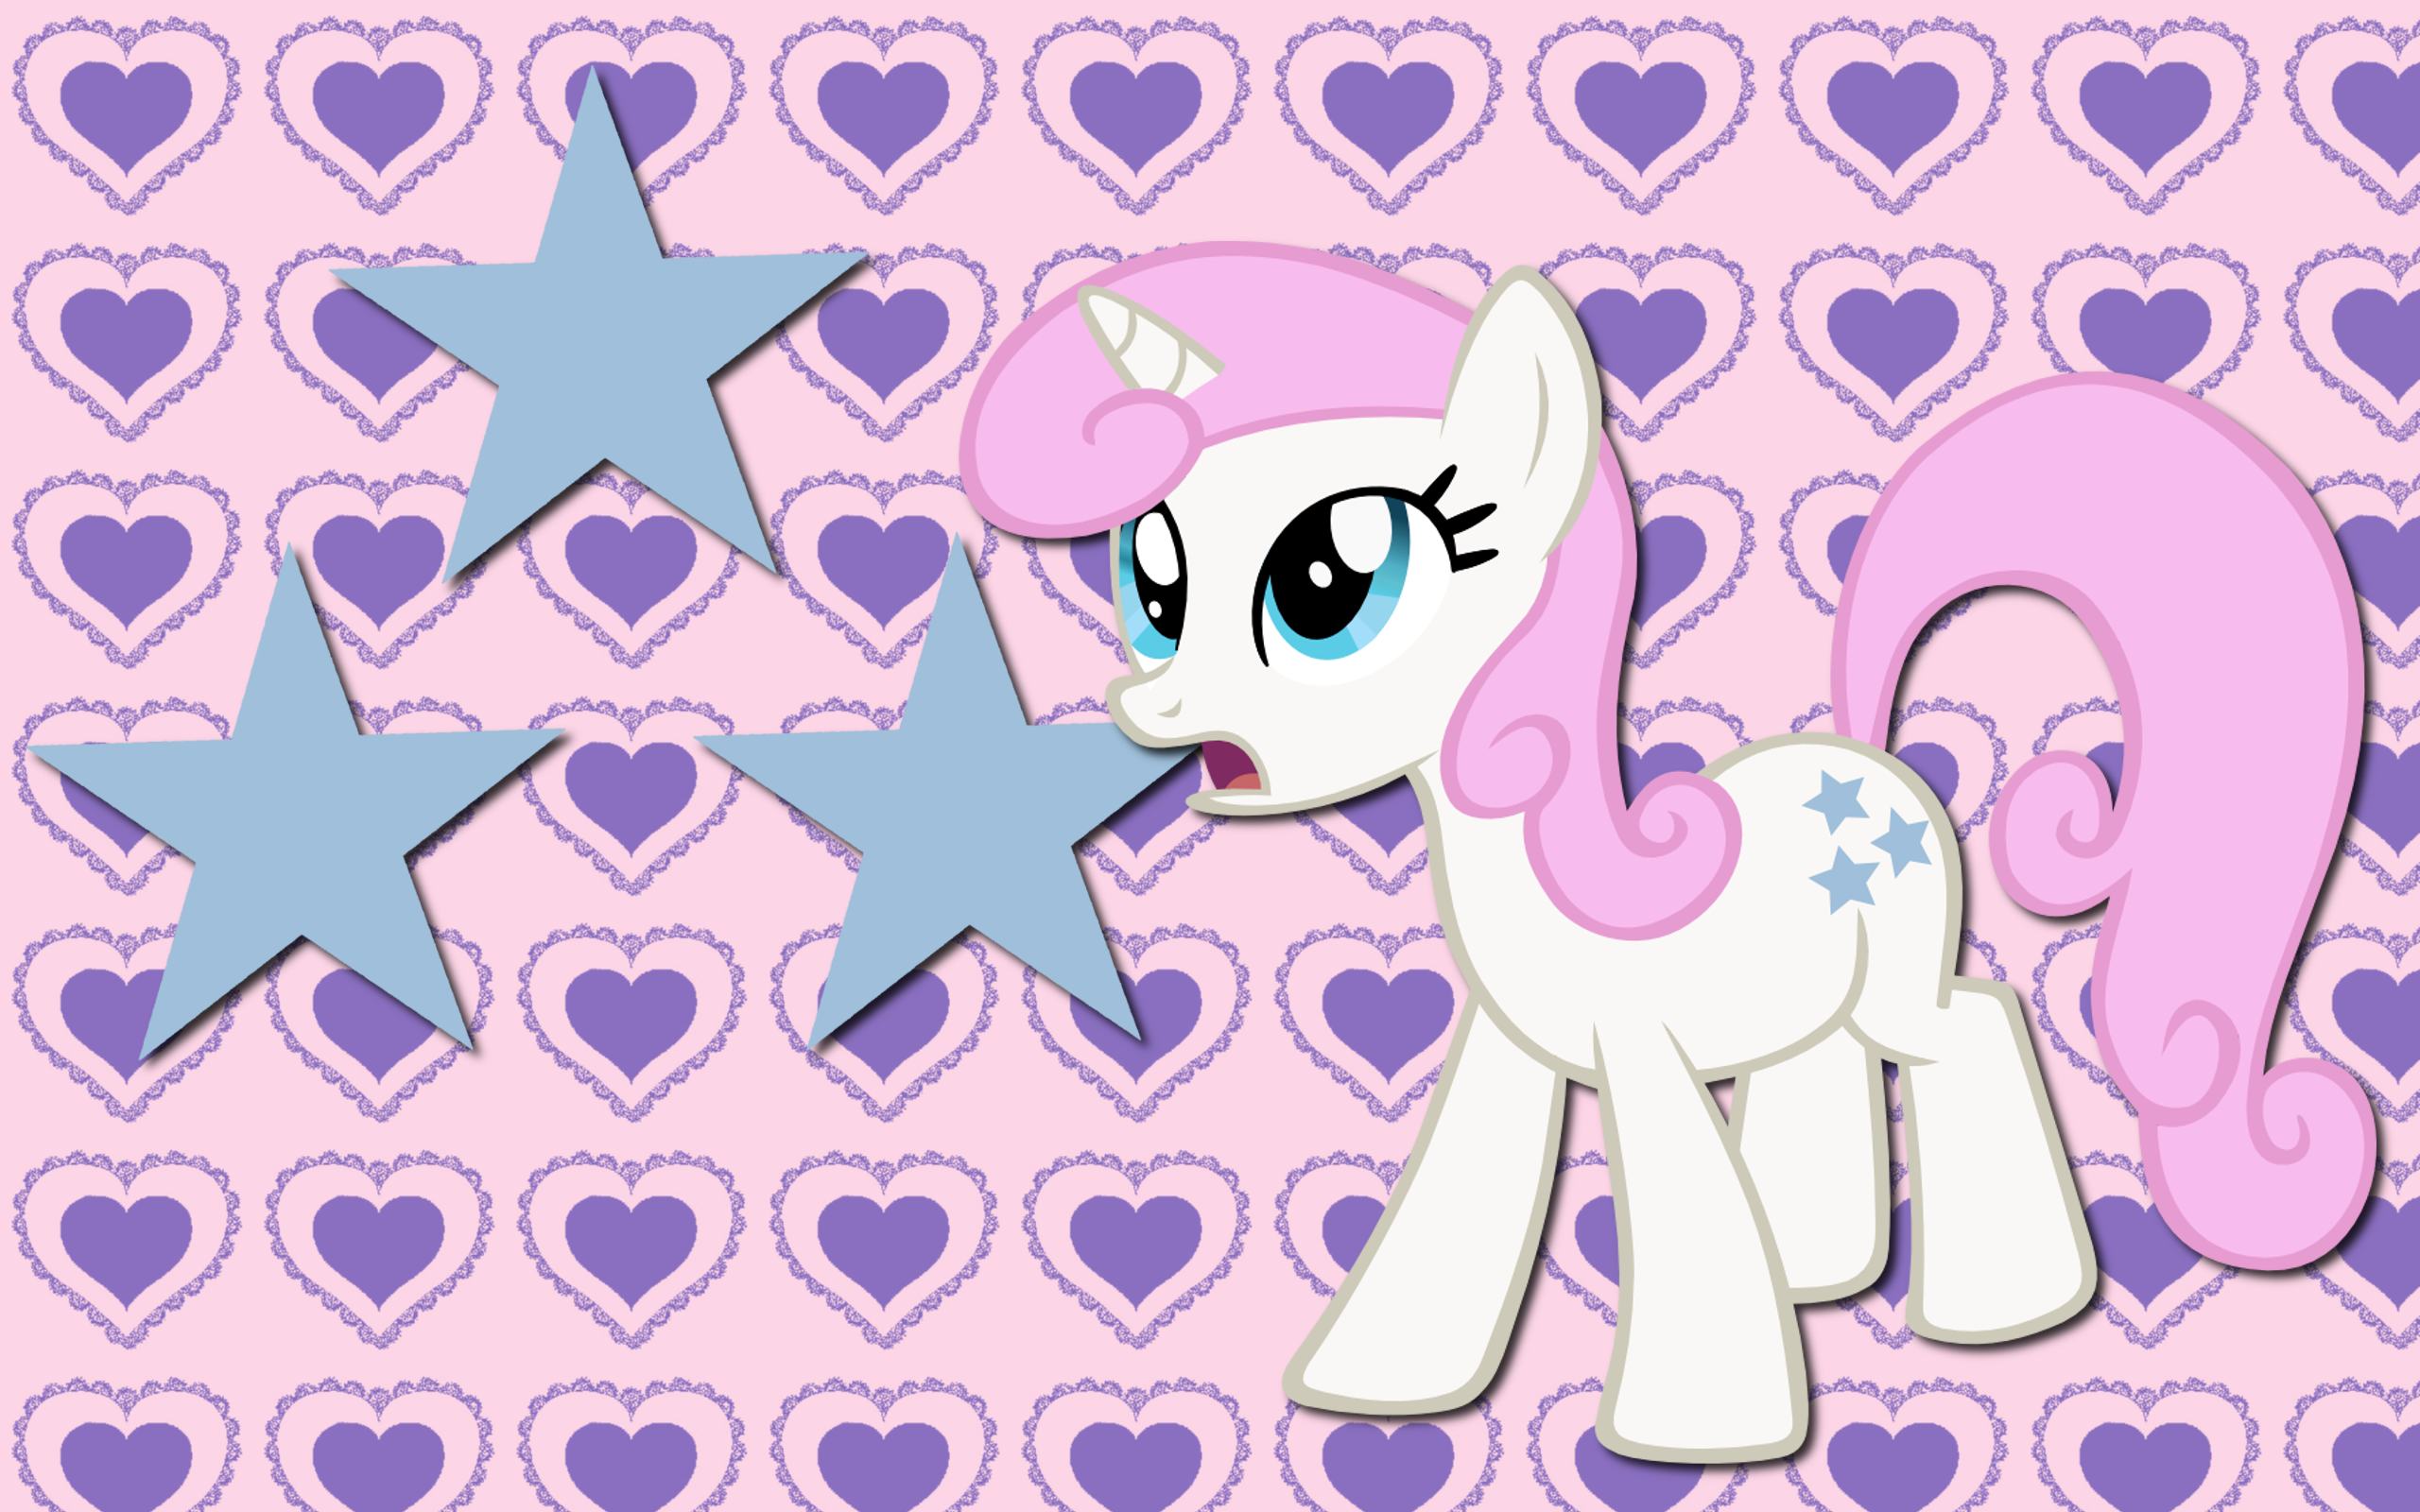 Twinkle WP by AliceHumanSacrifice0, Chisella1412 and The-Smiling-Pony